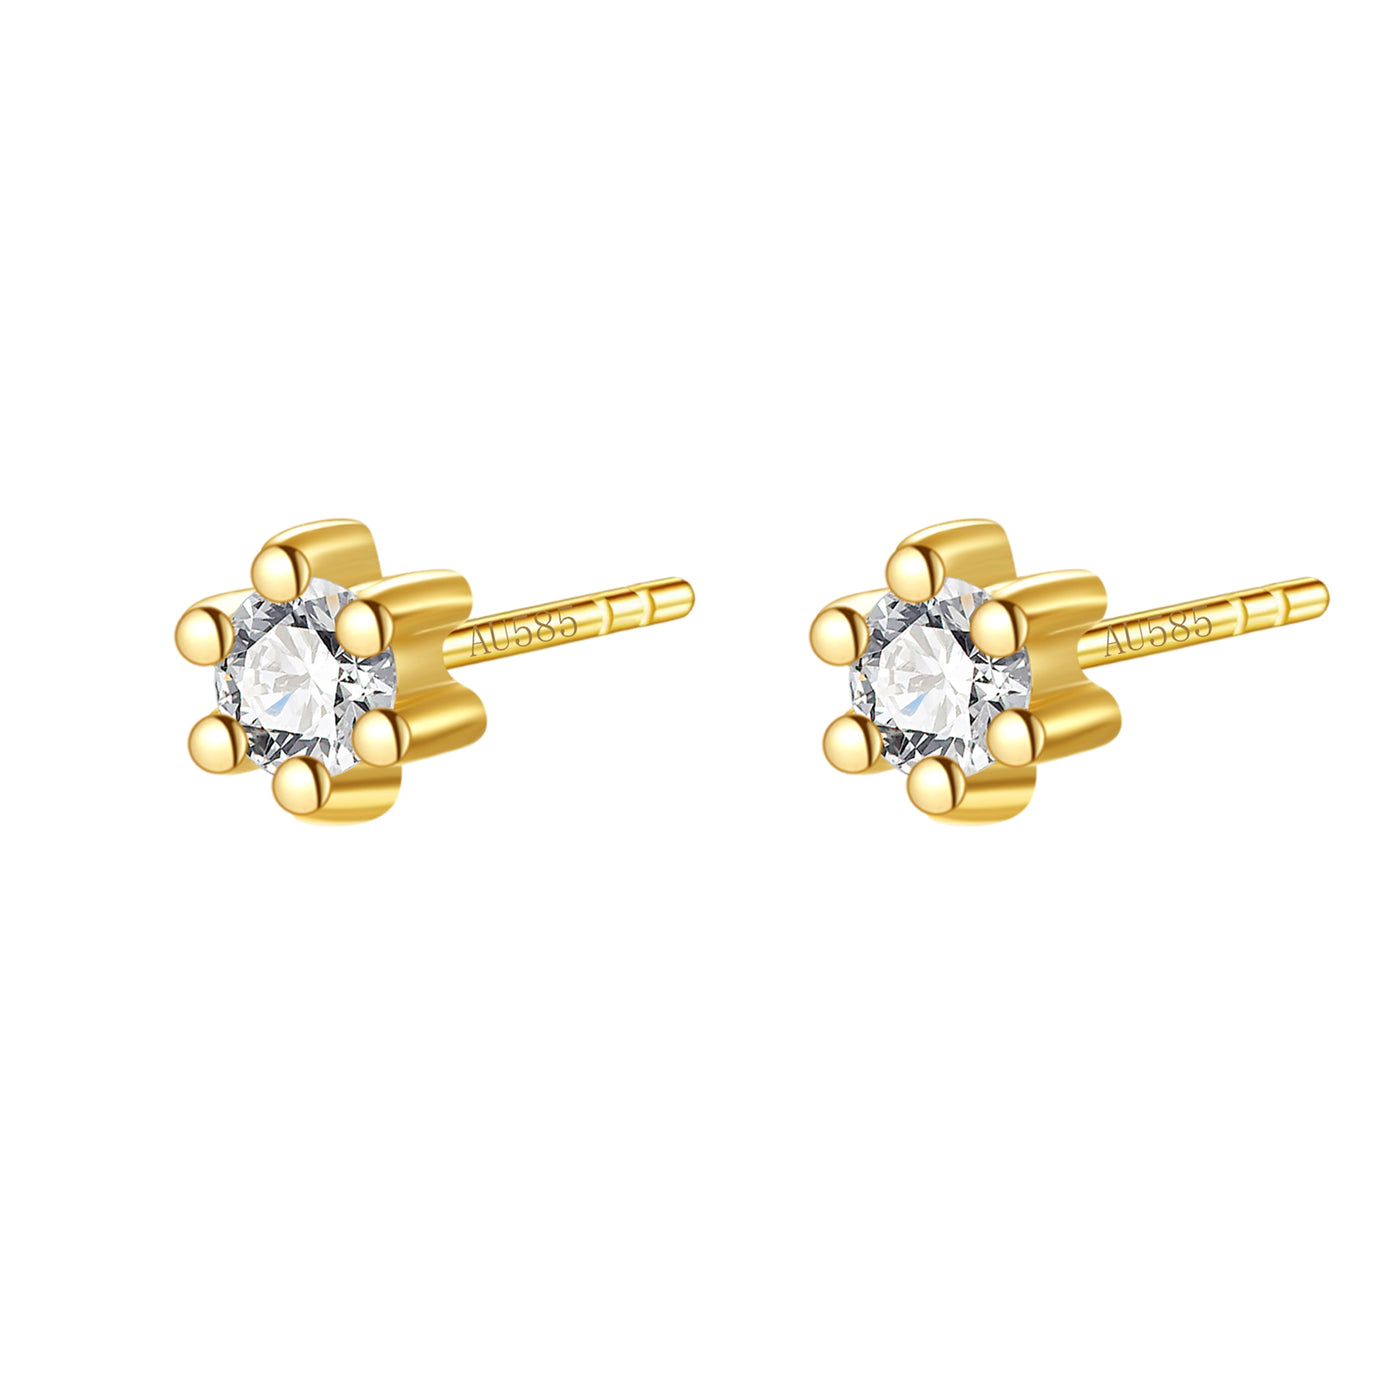 Purity Gold 585 Ohrstecker